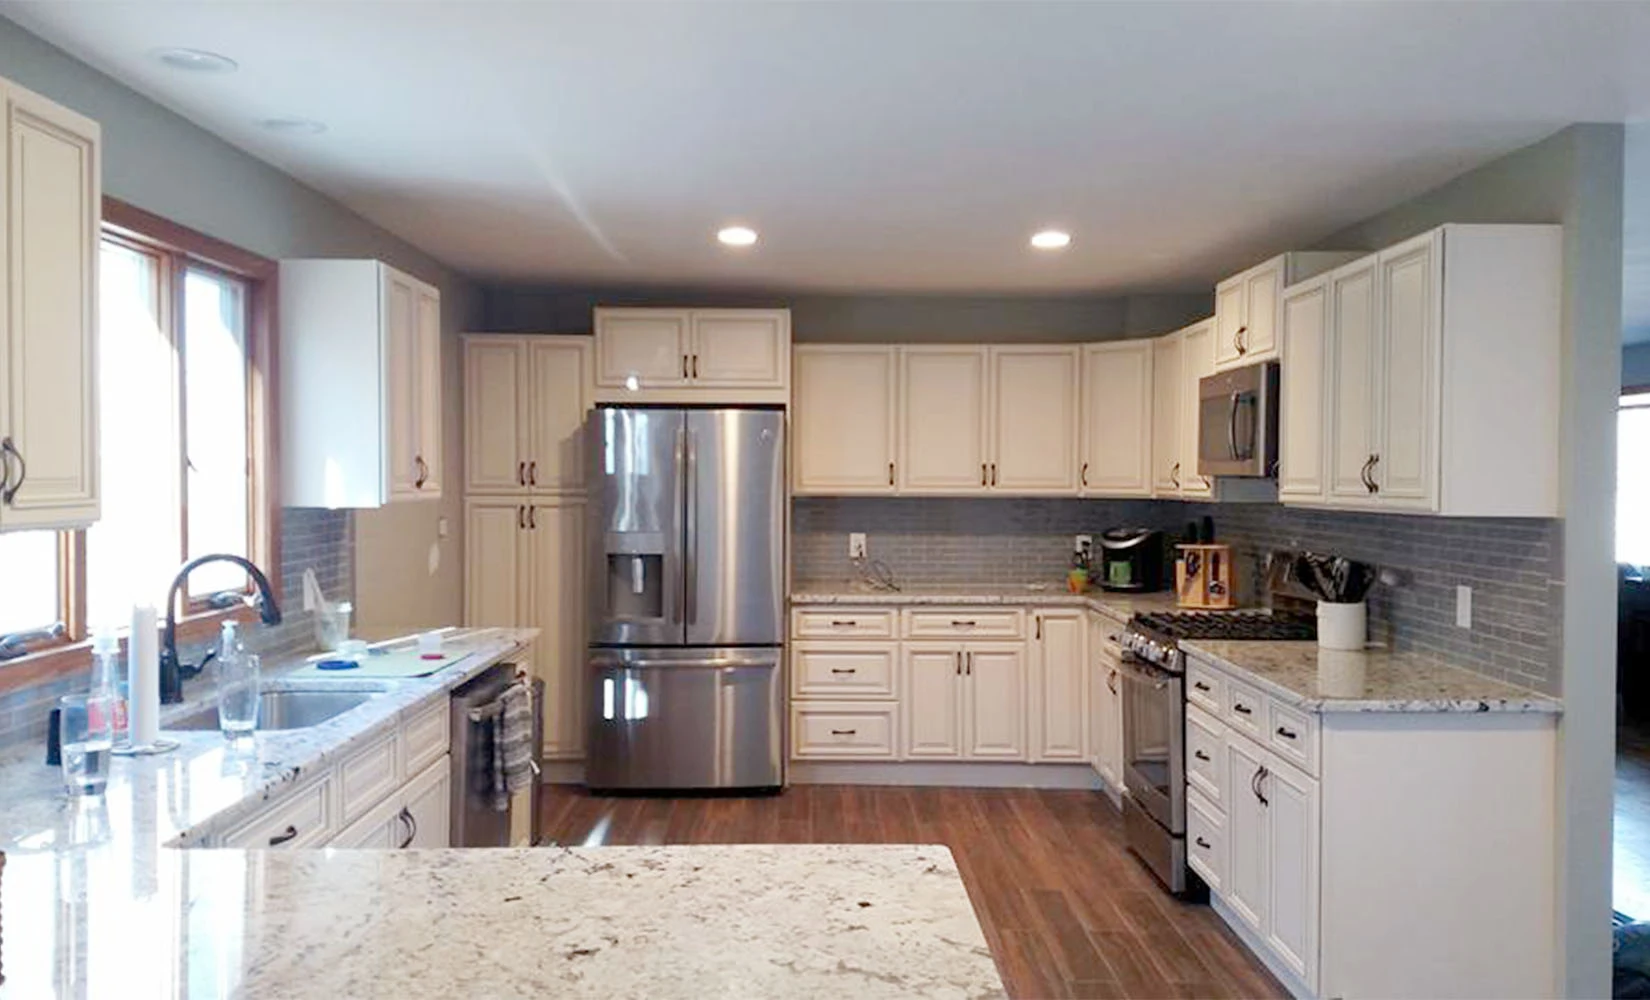 Kitchen with pearl cabinets from Kitchen Cabinet Kings.